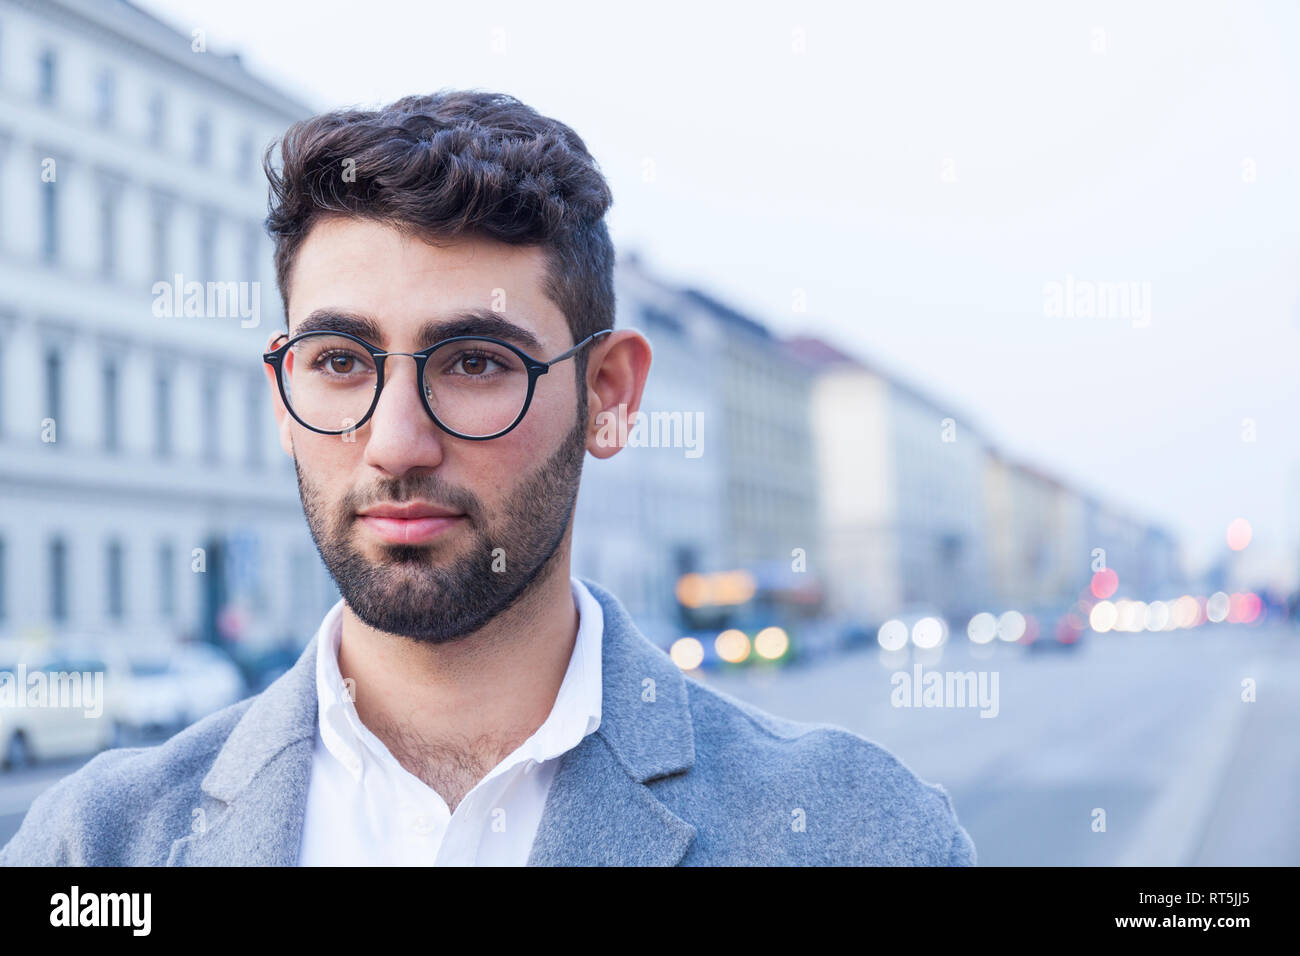 Portrait of bearded young businessman wearing glasses Stock Photo